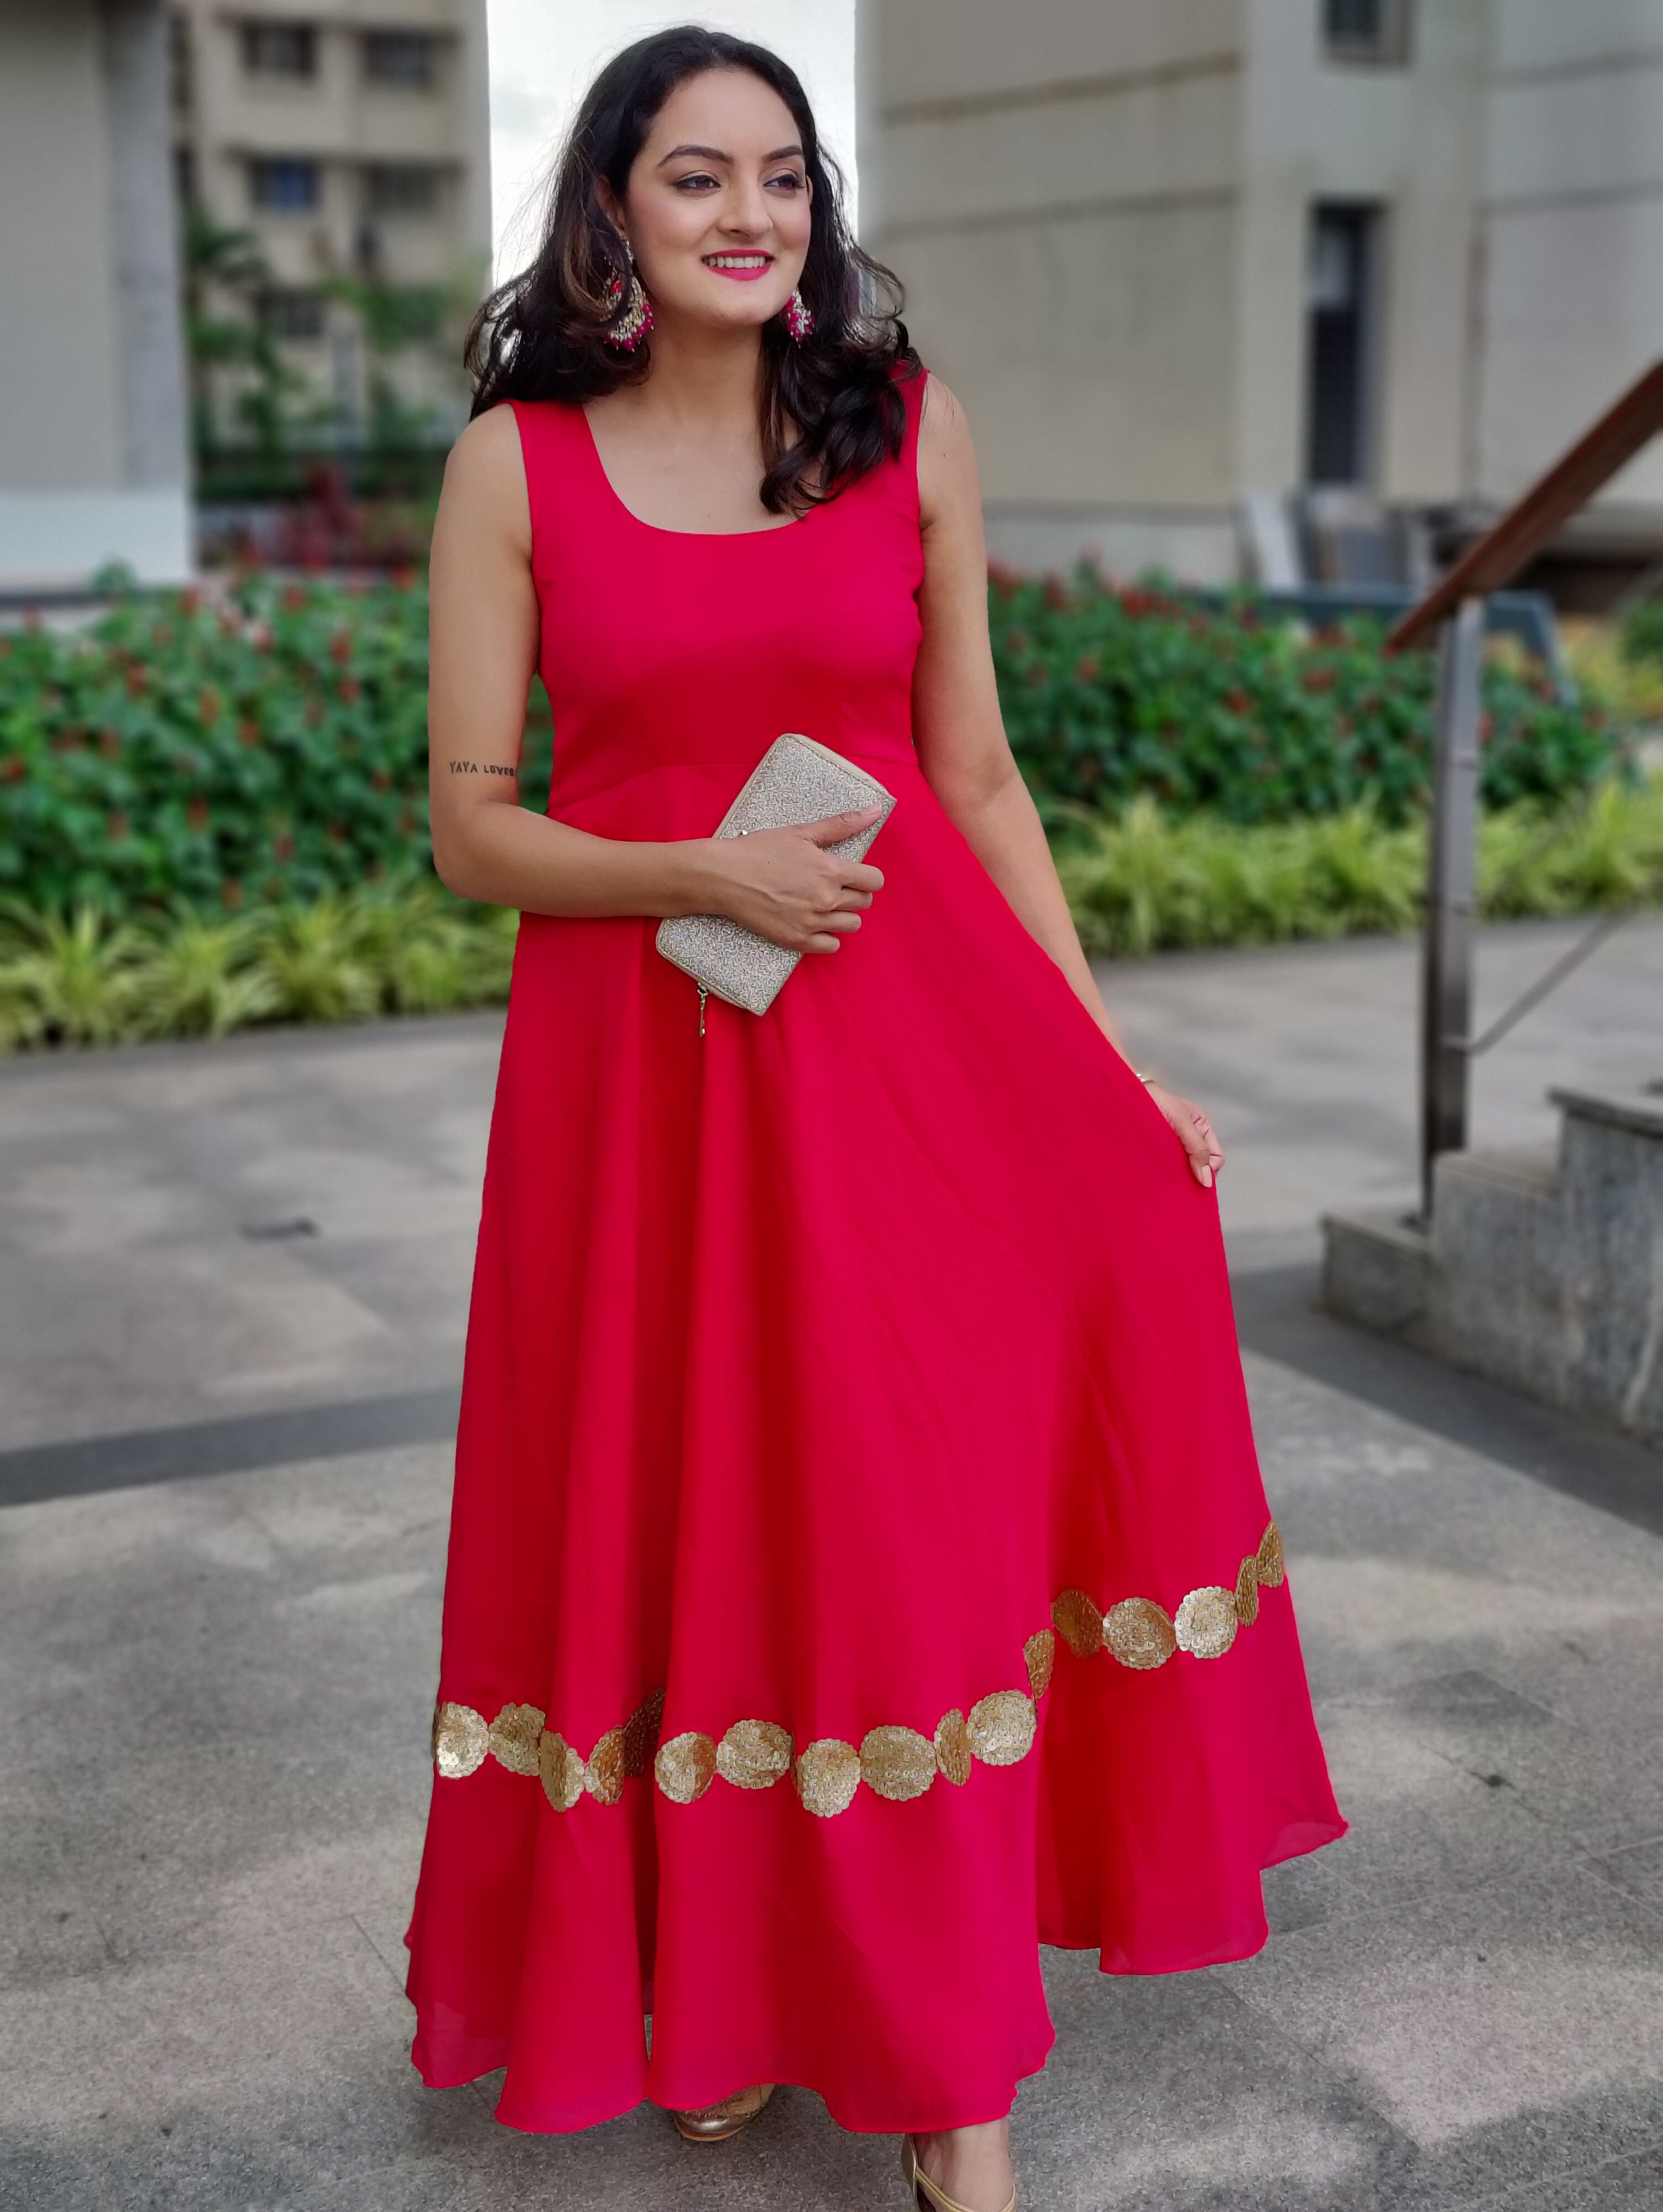 Women's Georgette Traditional Ethnic Long Gown Western Dress with Round  Neck | eBay